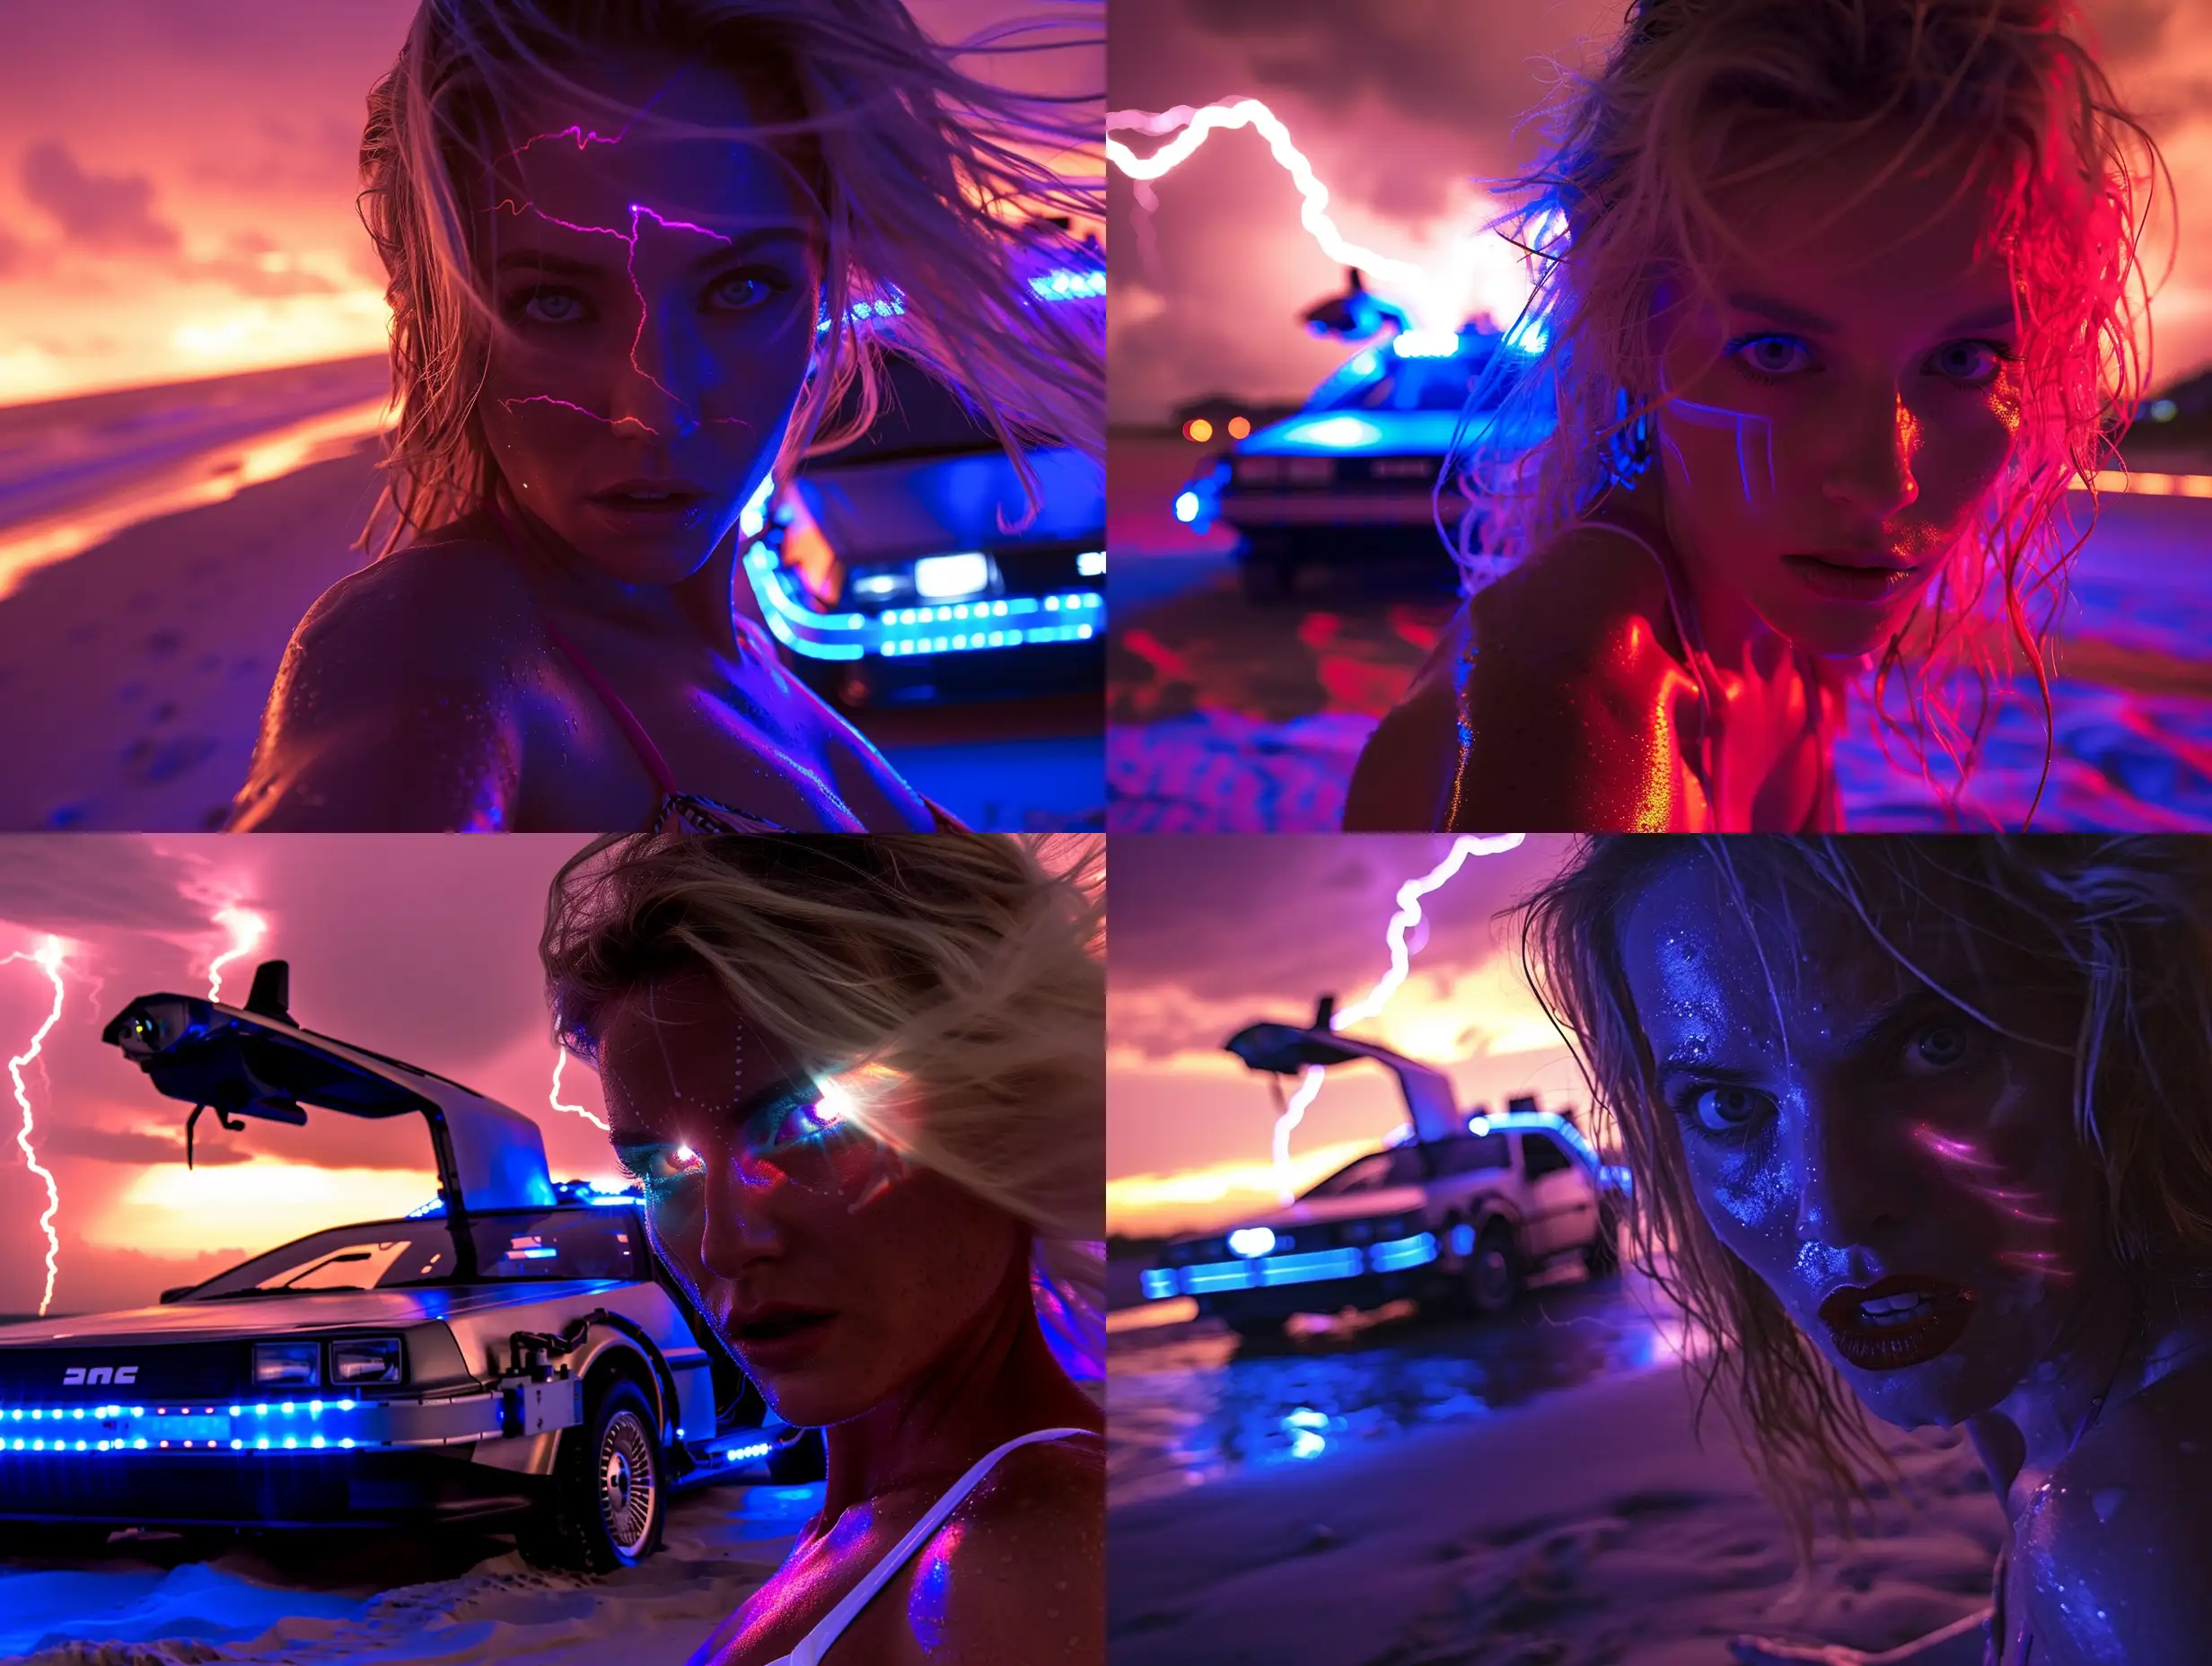 Futuristic-Blonde-in-Swimsuit-with-Back-to-the-Future-Delorean-at-Sunset-Beach